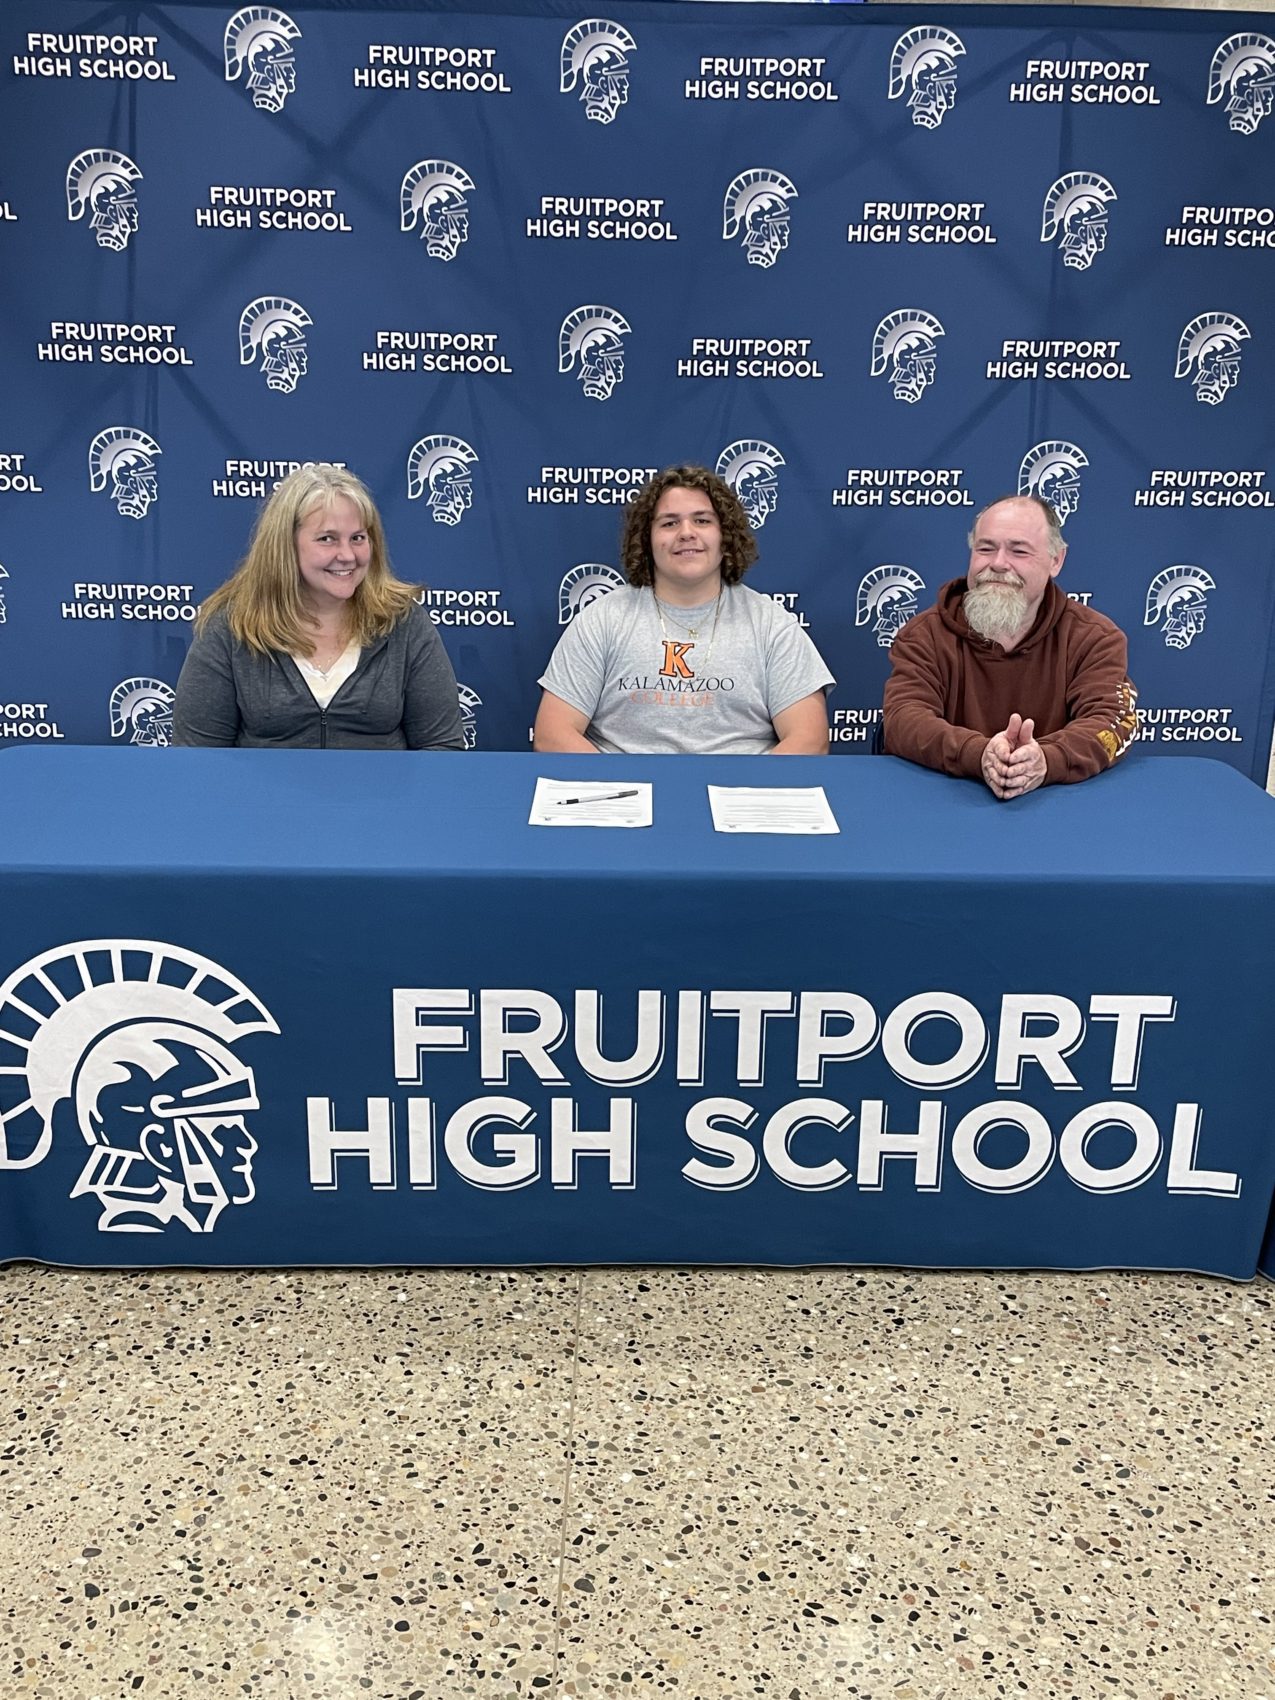 Academic all-stater Cody Leonard of Fruitport is heading to Kalamazoo College to play football